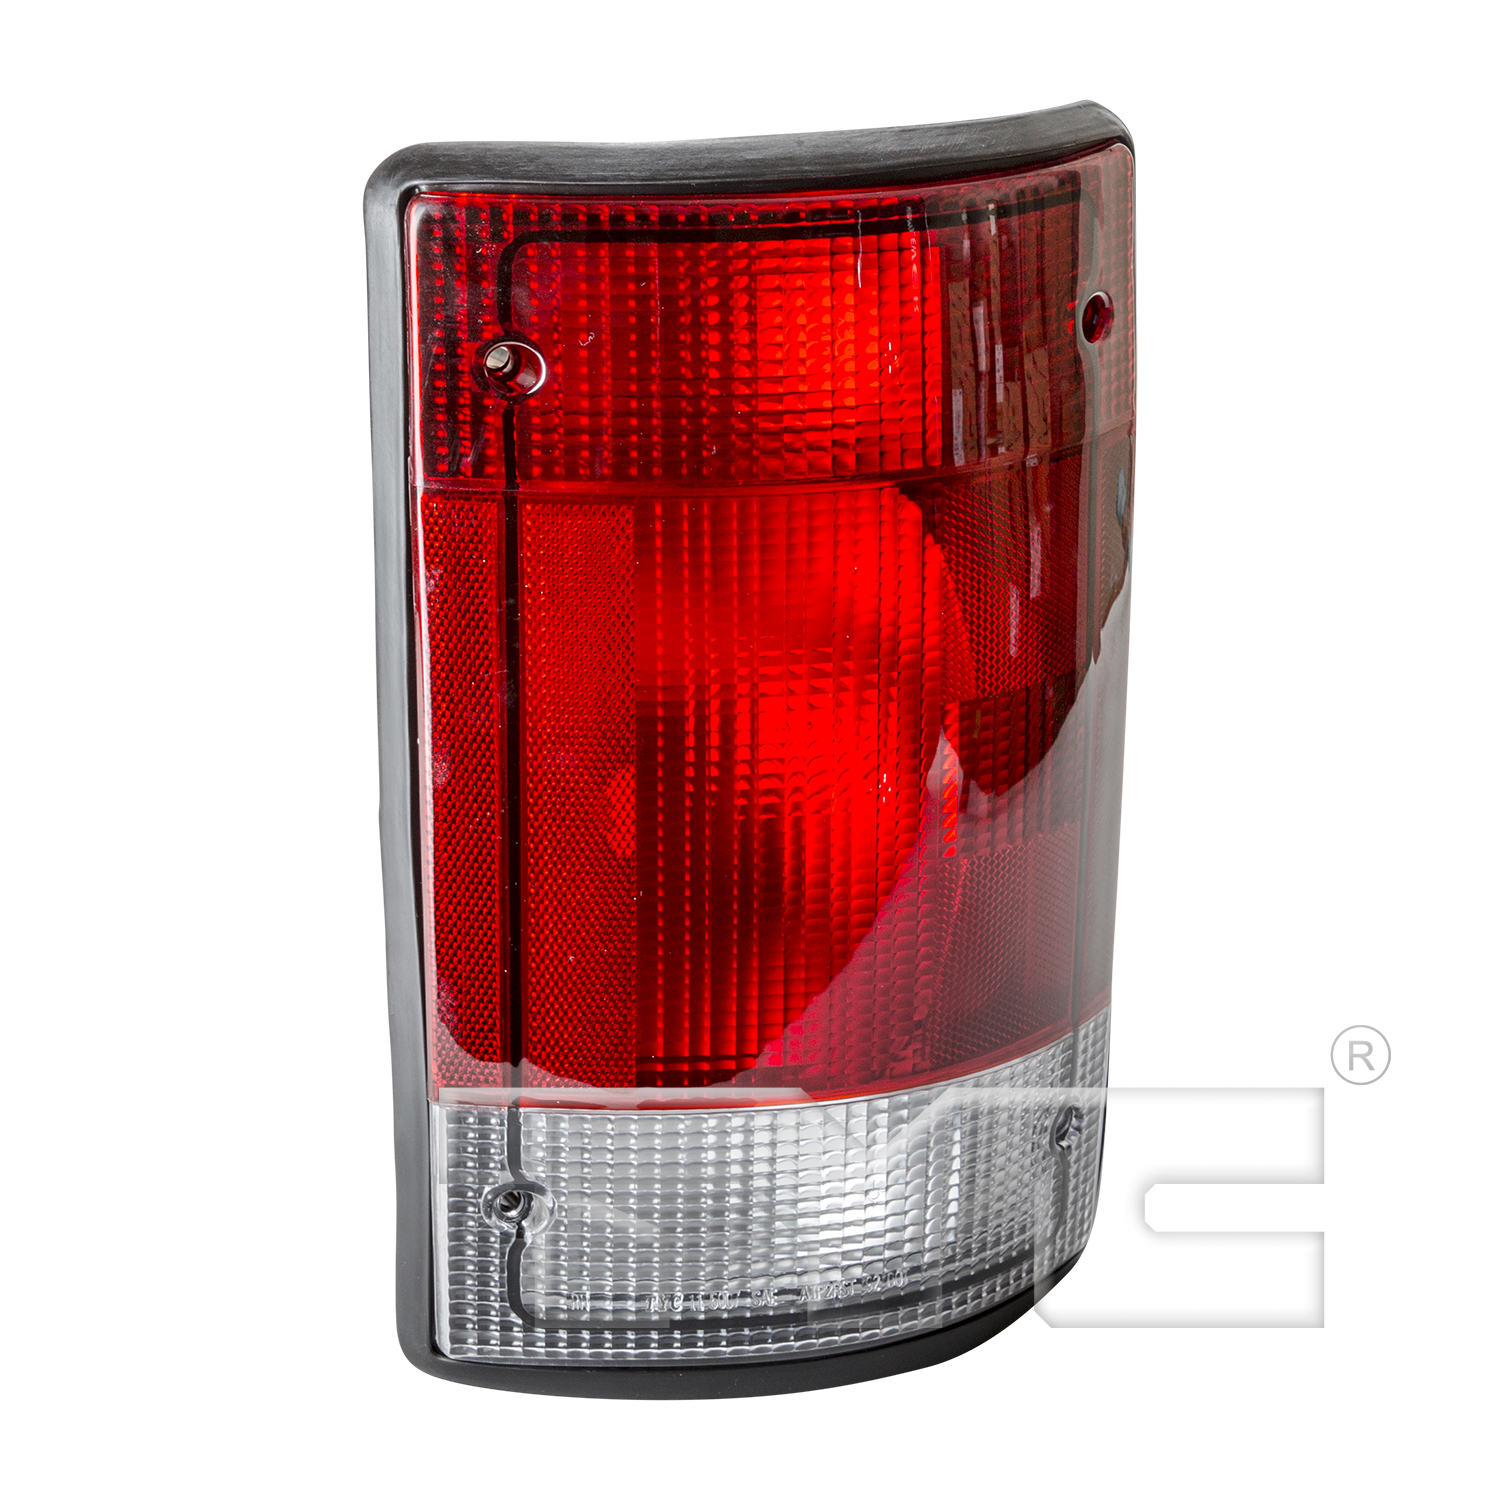 Aftermarket TAILLIGHTS for FORD - E-350 CLUB WAGON, E-350 CLUB WAGON,03-03,RT Taillamp assy